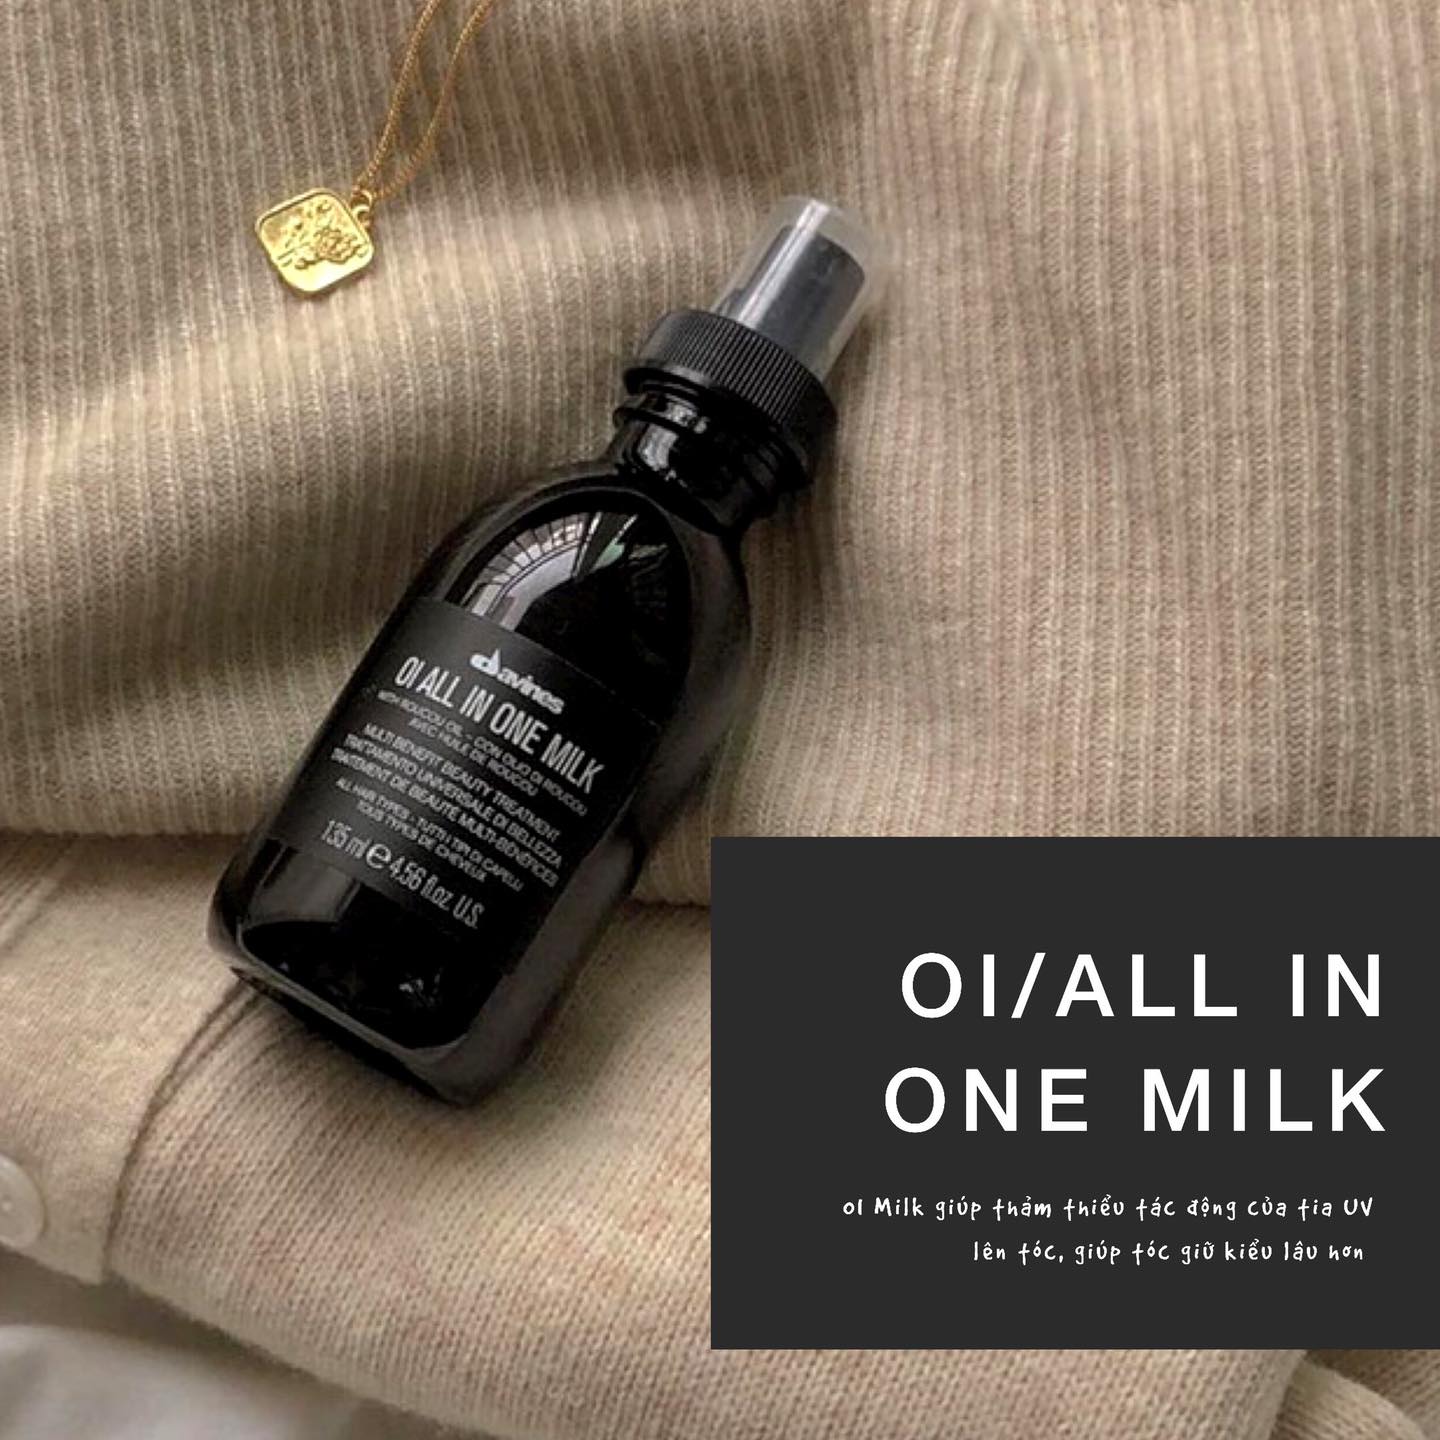 Xịt dưỡng Davines oi/all in one milk